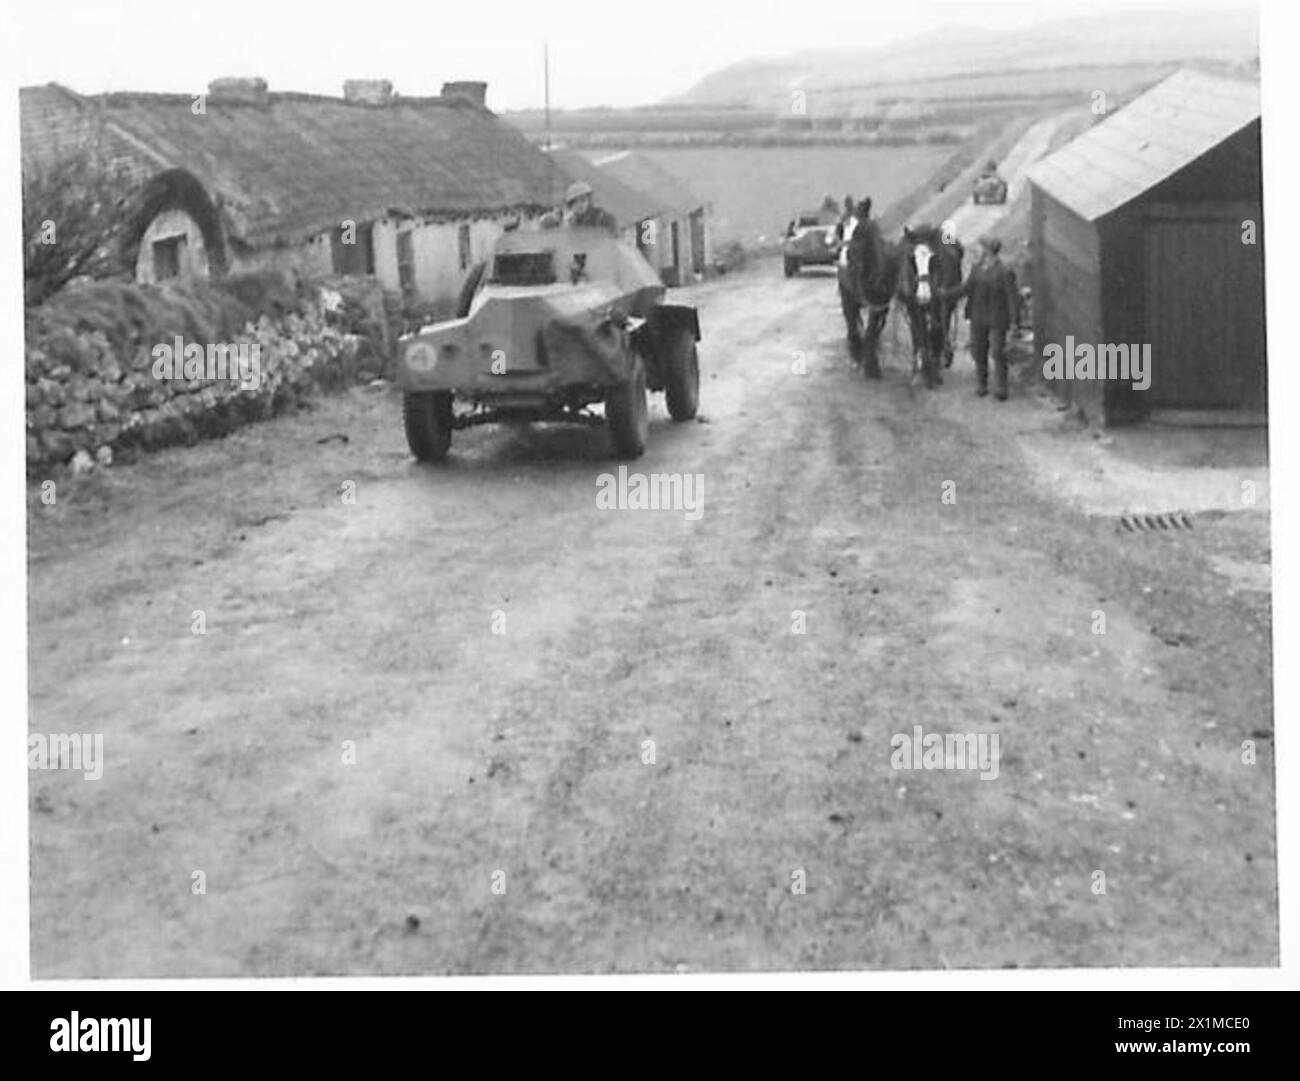 BRITISH FORCES IN NORTHERN IRELAND - Armoured cars (Humberettes) passing through a typical North of Ireland village. In the distance is the Giants Causeway, British Army Stock Photo